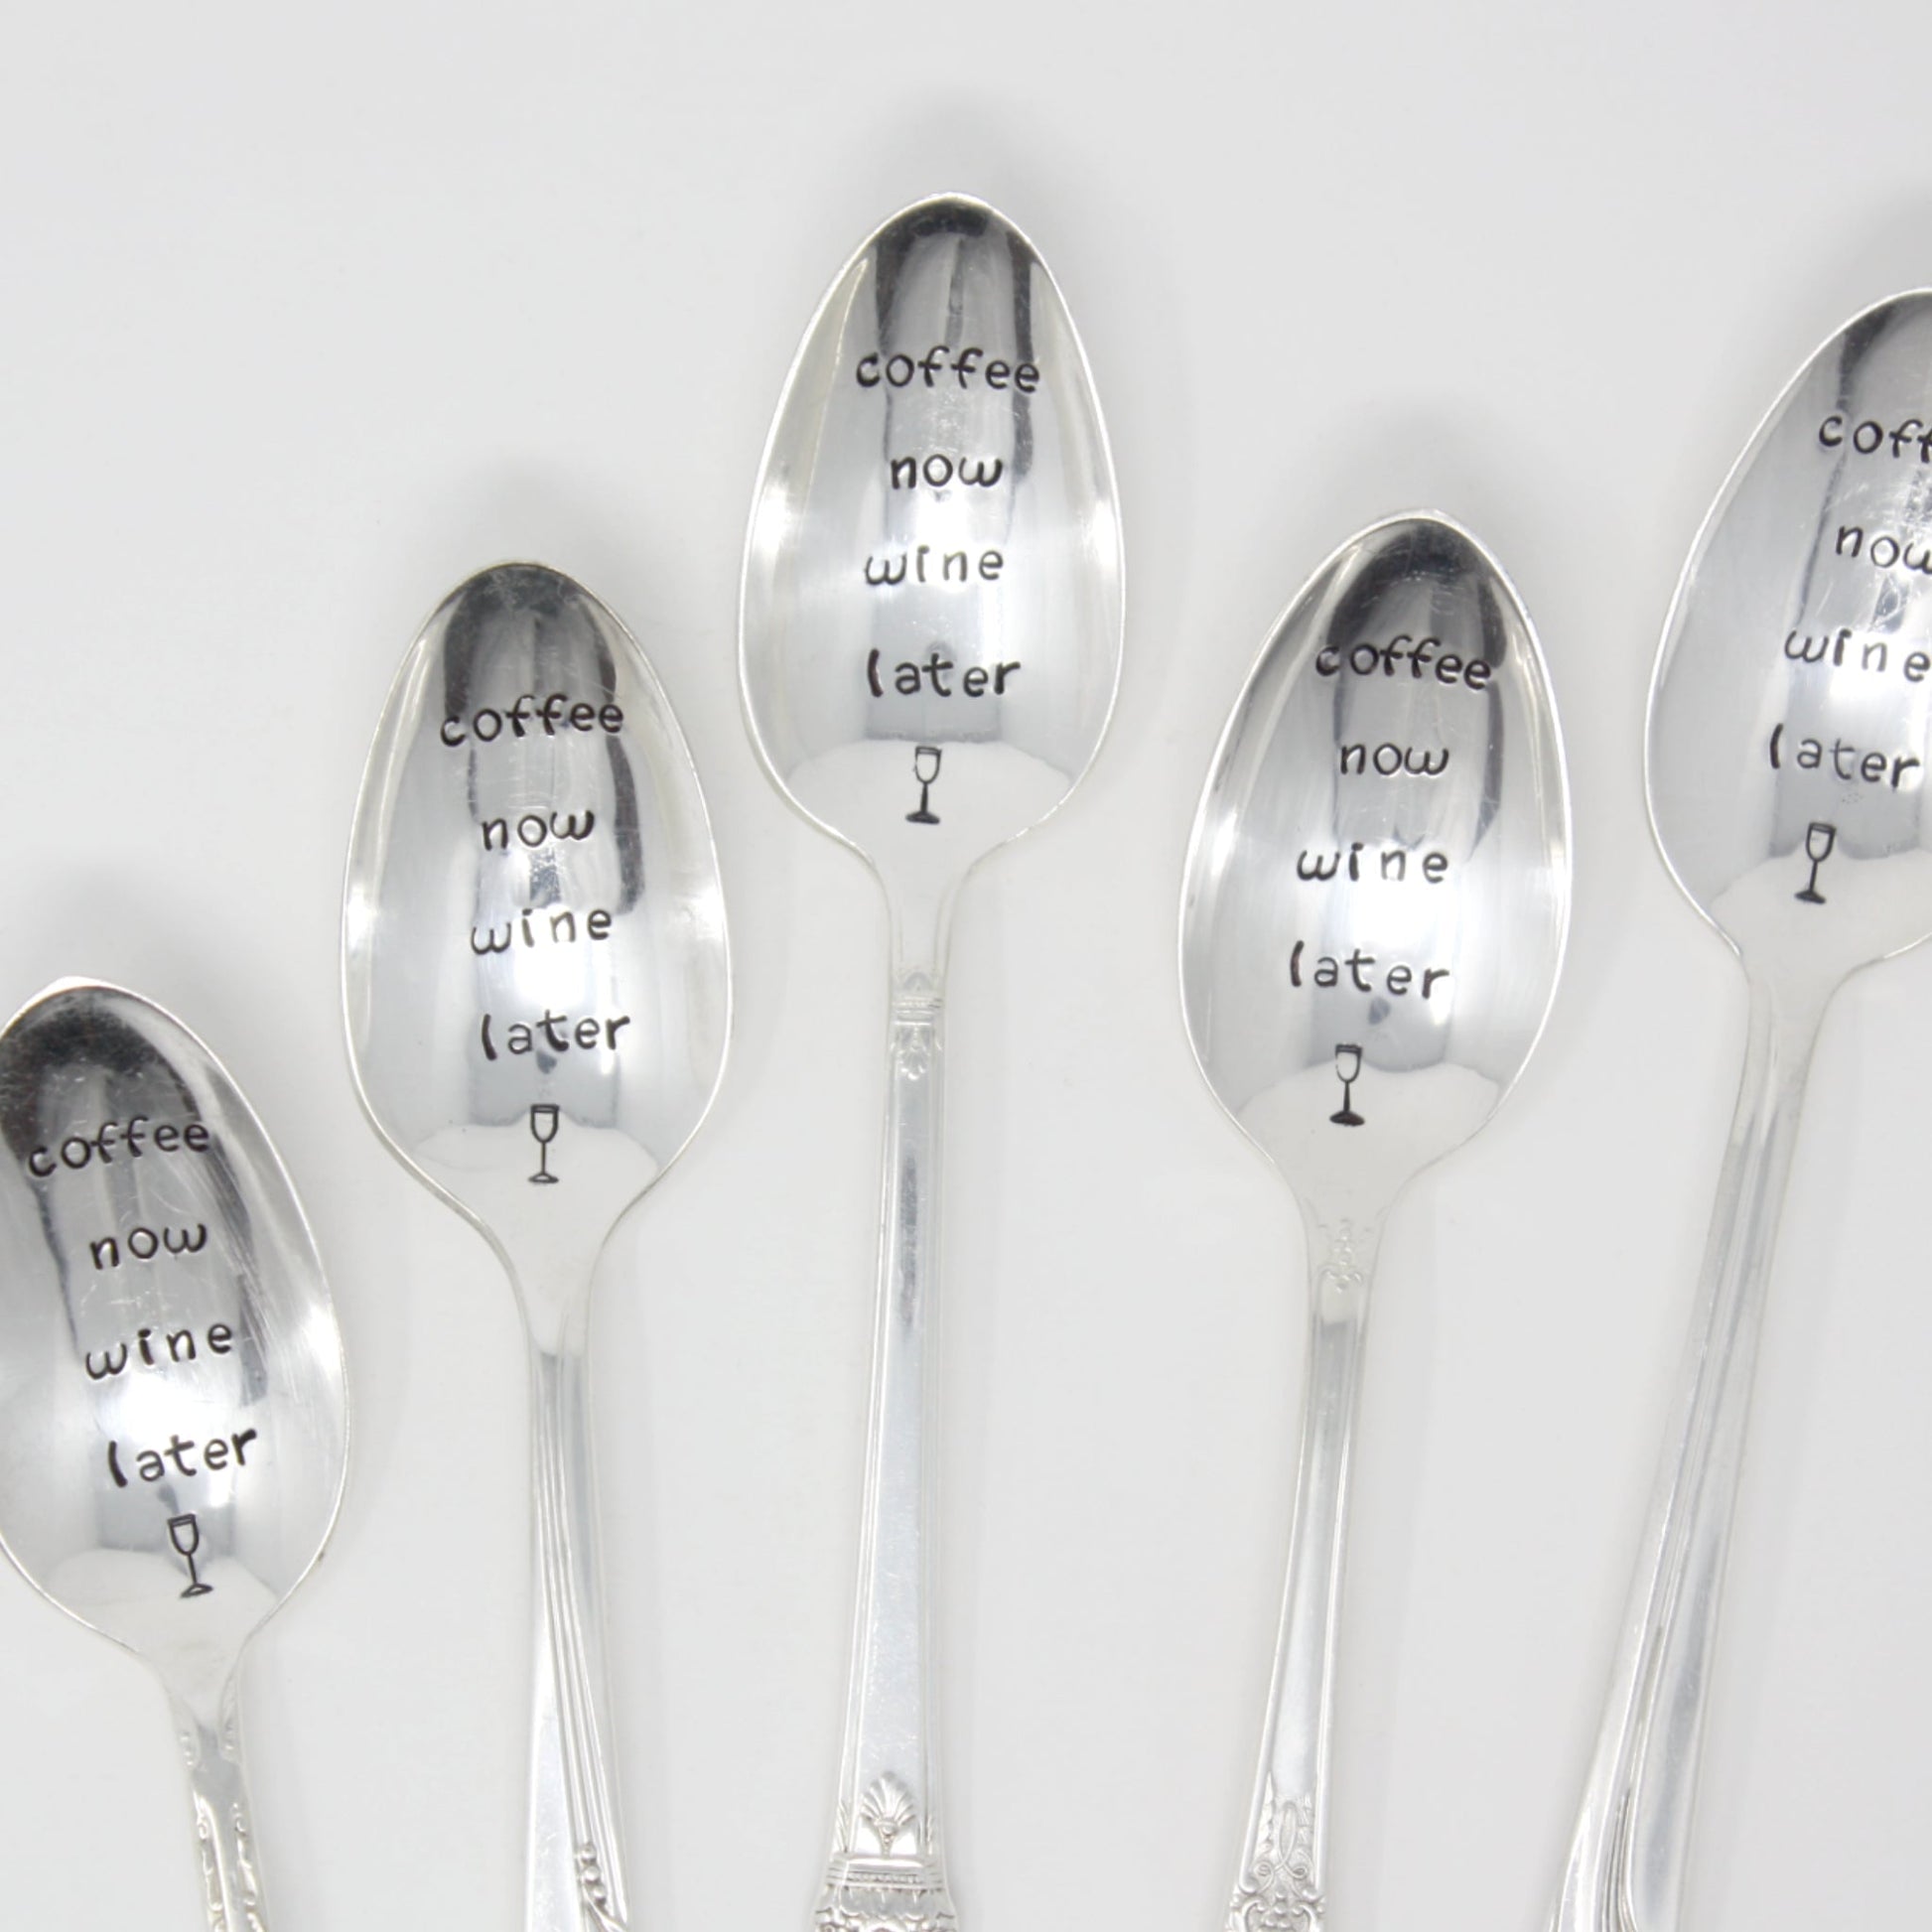 Vintage Stamped Spoons - Coffee Now Wine Later - Made in the USA